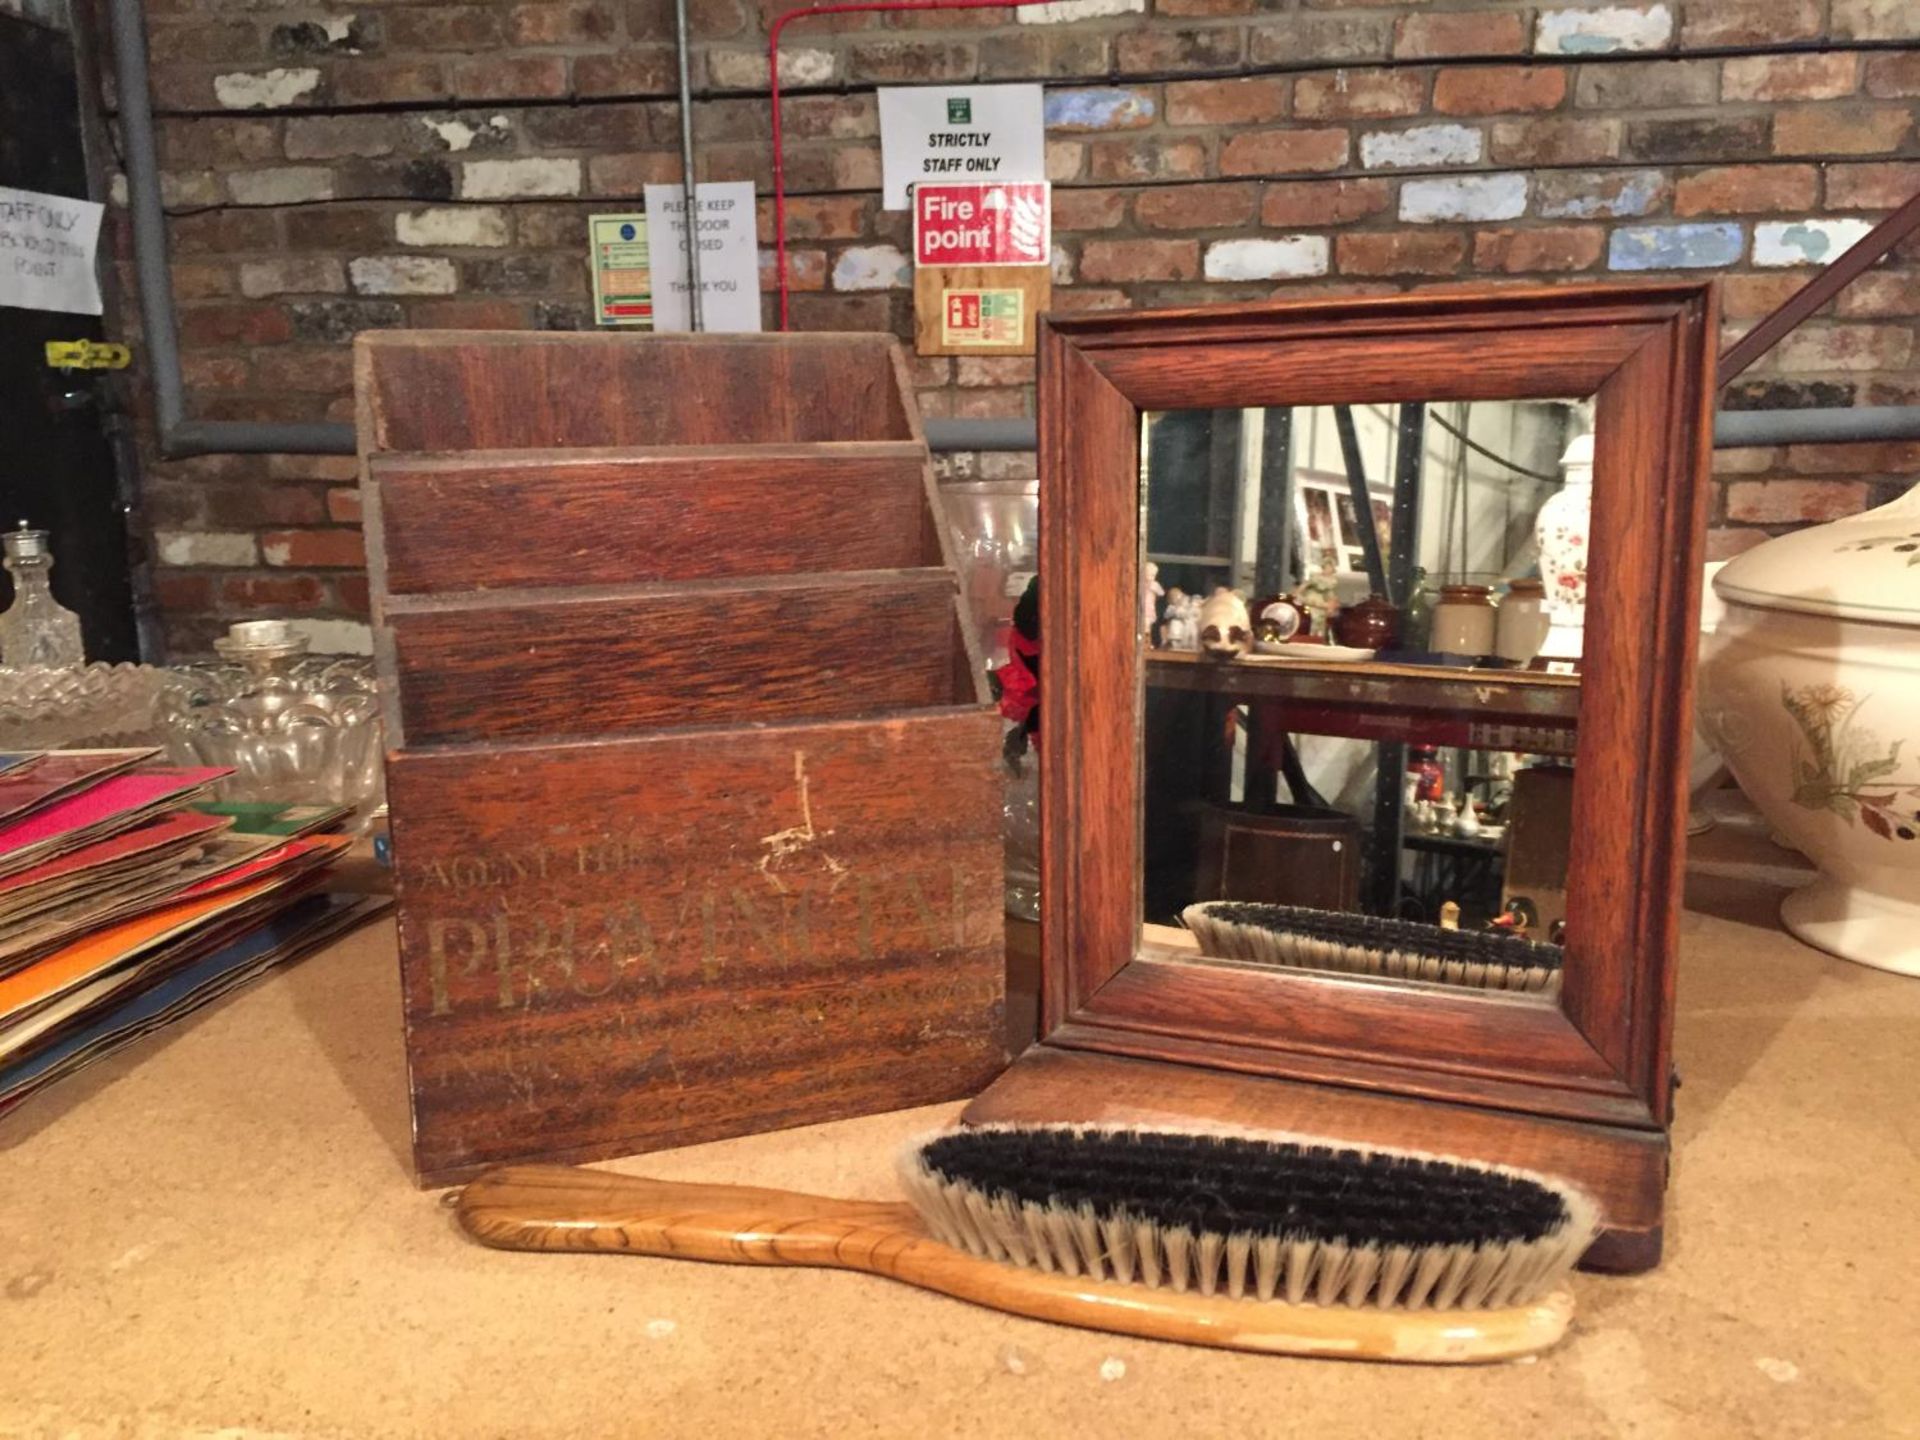 THREE VINTAGE ITEMS TO INCLUDE A PROVINCIAL INSURANCE LETTER RACK, A JUST HOUSEWARE BRUSH AND A